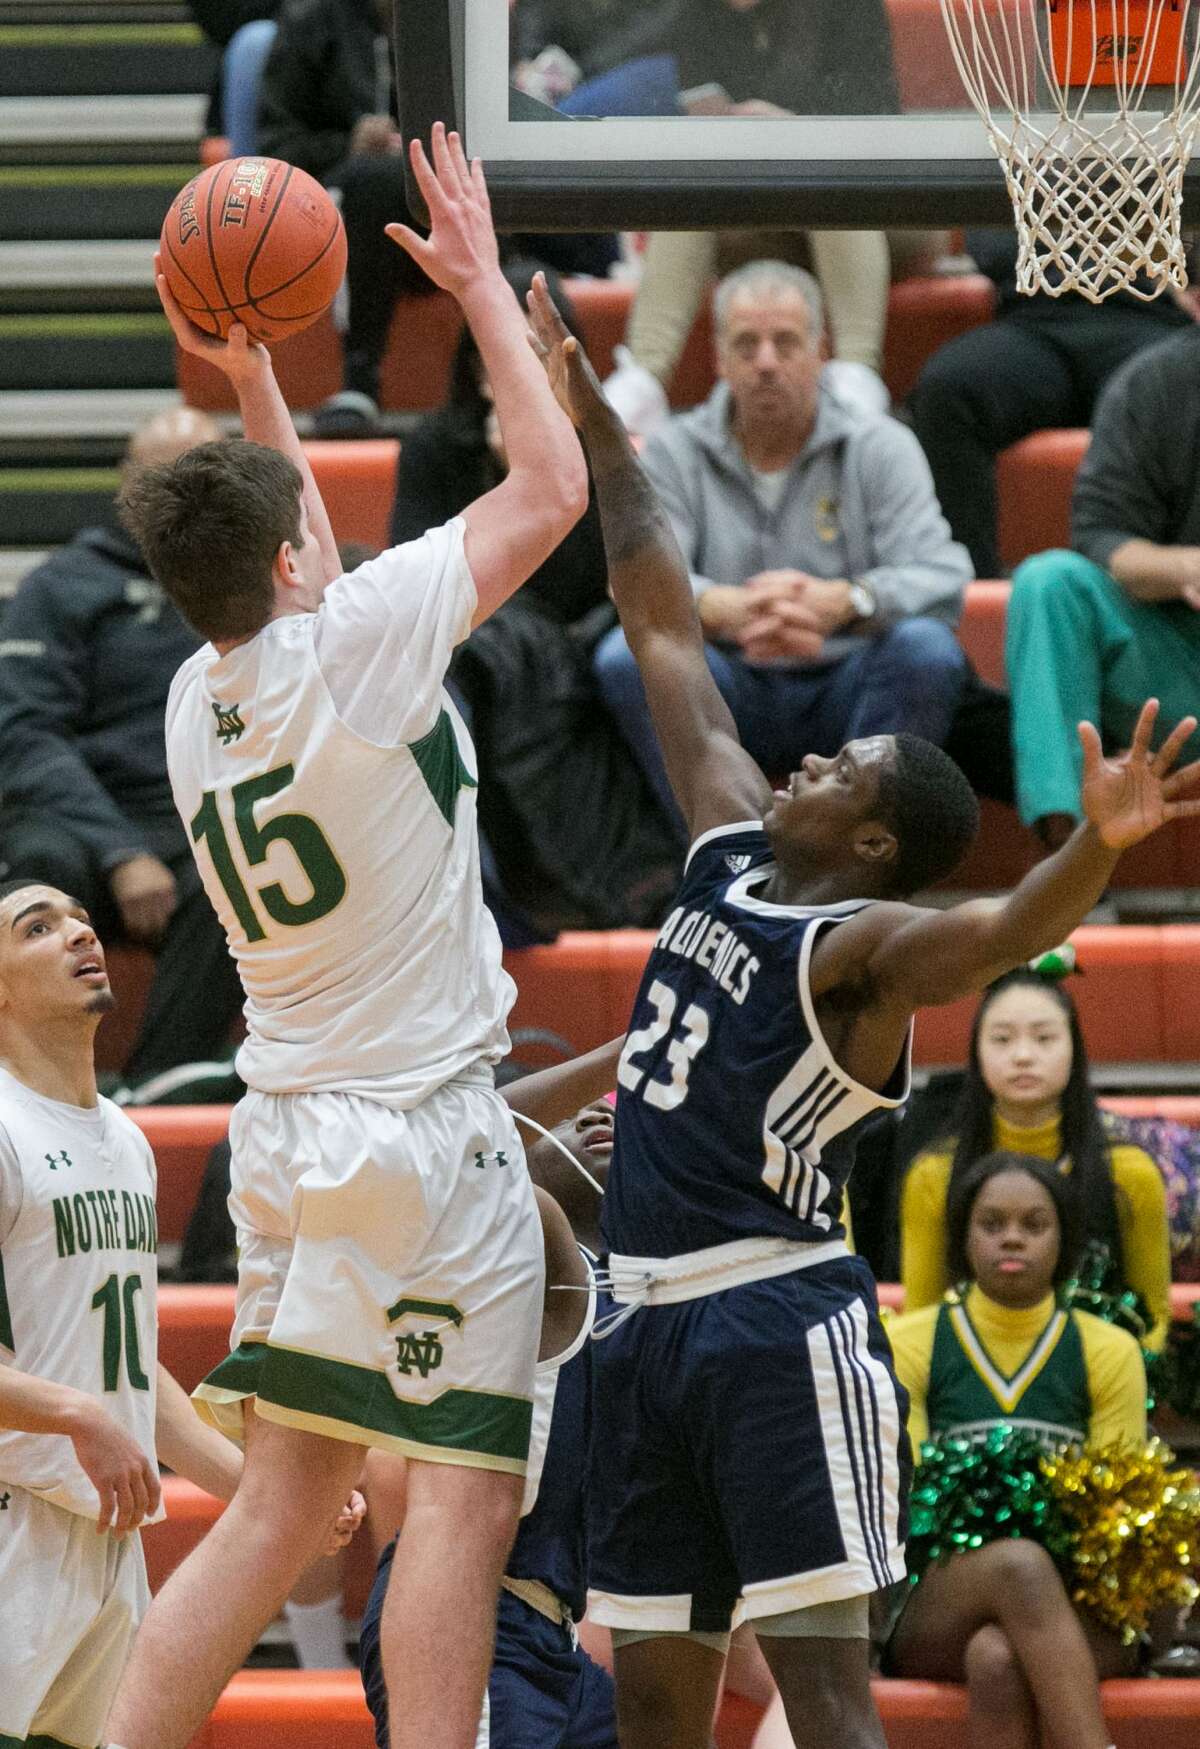 (John Vanacore/For Hearst Connecicut Media) The Notre Dame Green Knights and Hillhouse Academics traveled to Shelton High School for the 2nd Round of the CIAC Division 1 basketball tournament Wednesday night. Notre Dame advances to the Quarterfinals with their 57-36 win.